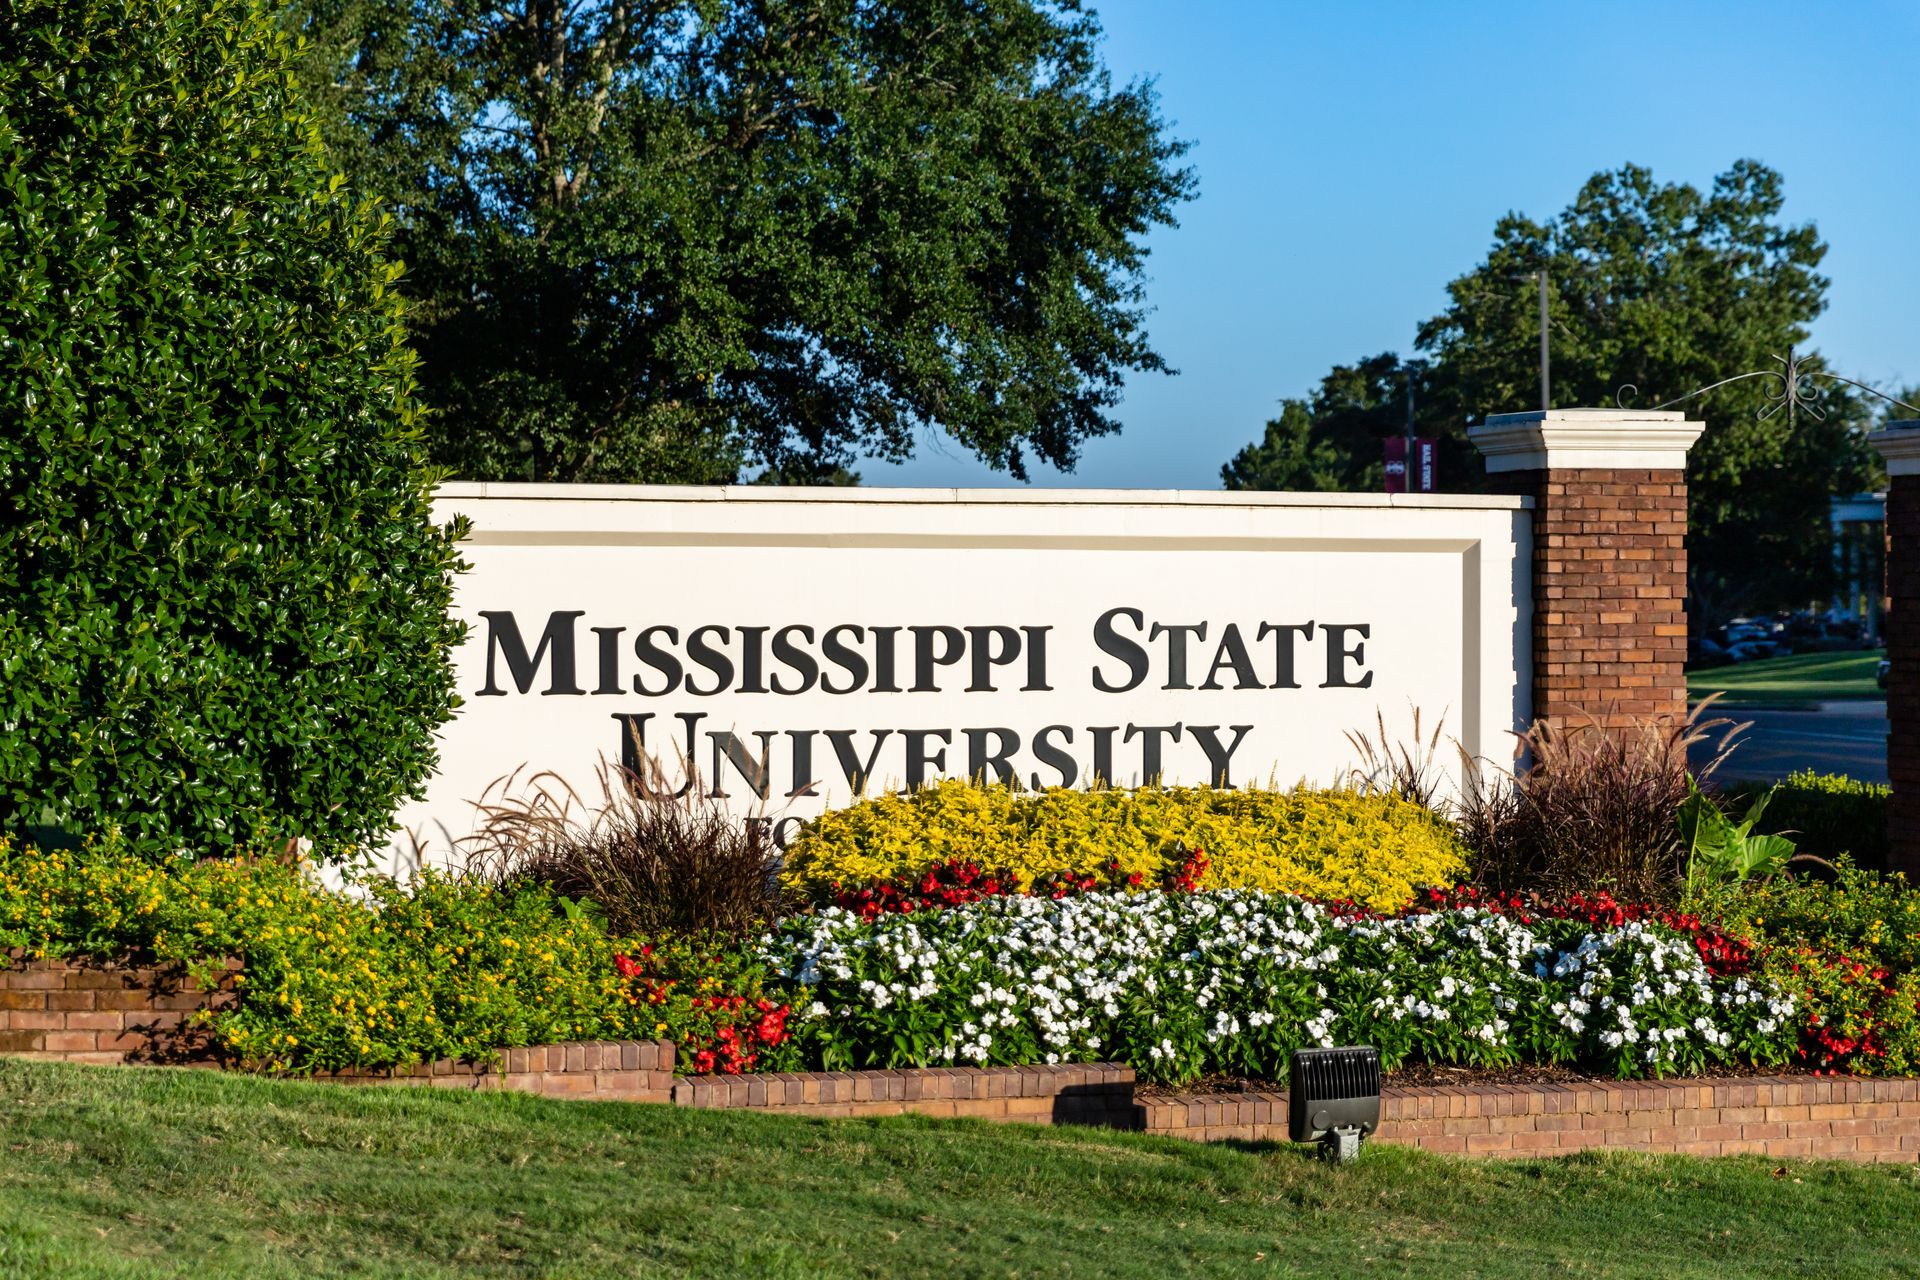 a sign for mississippi state university is surrounded by flowers